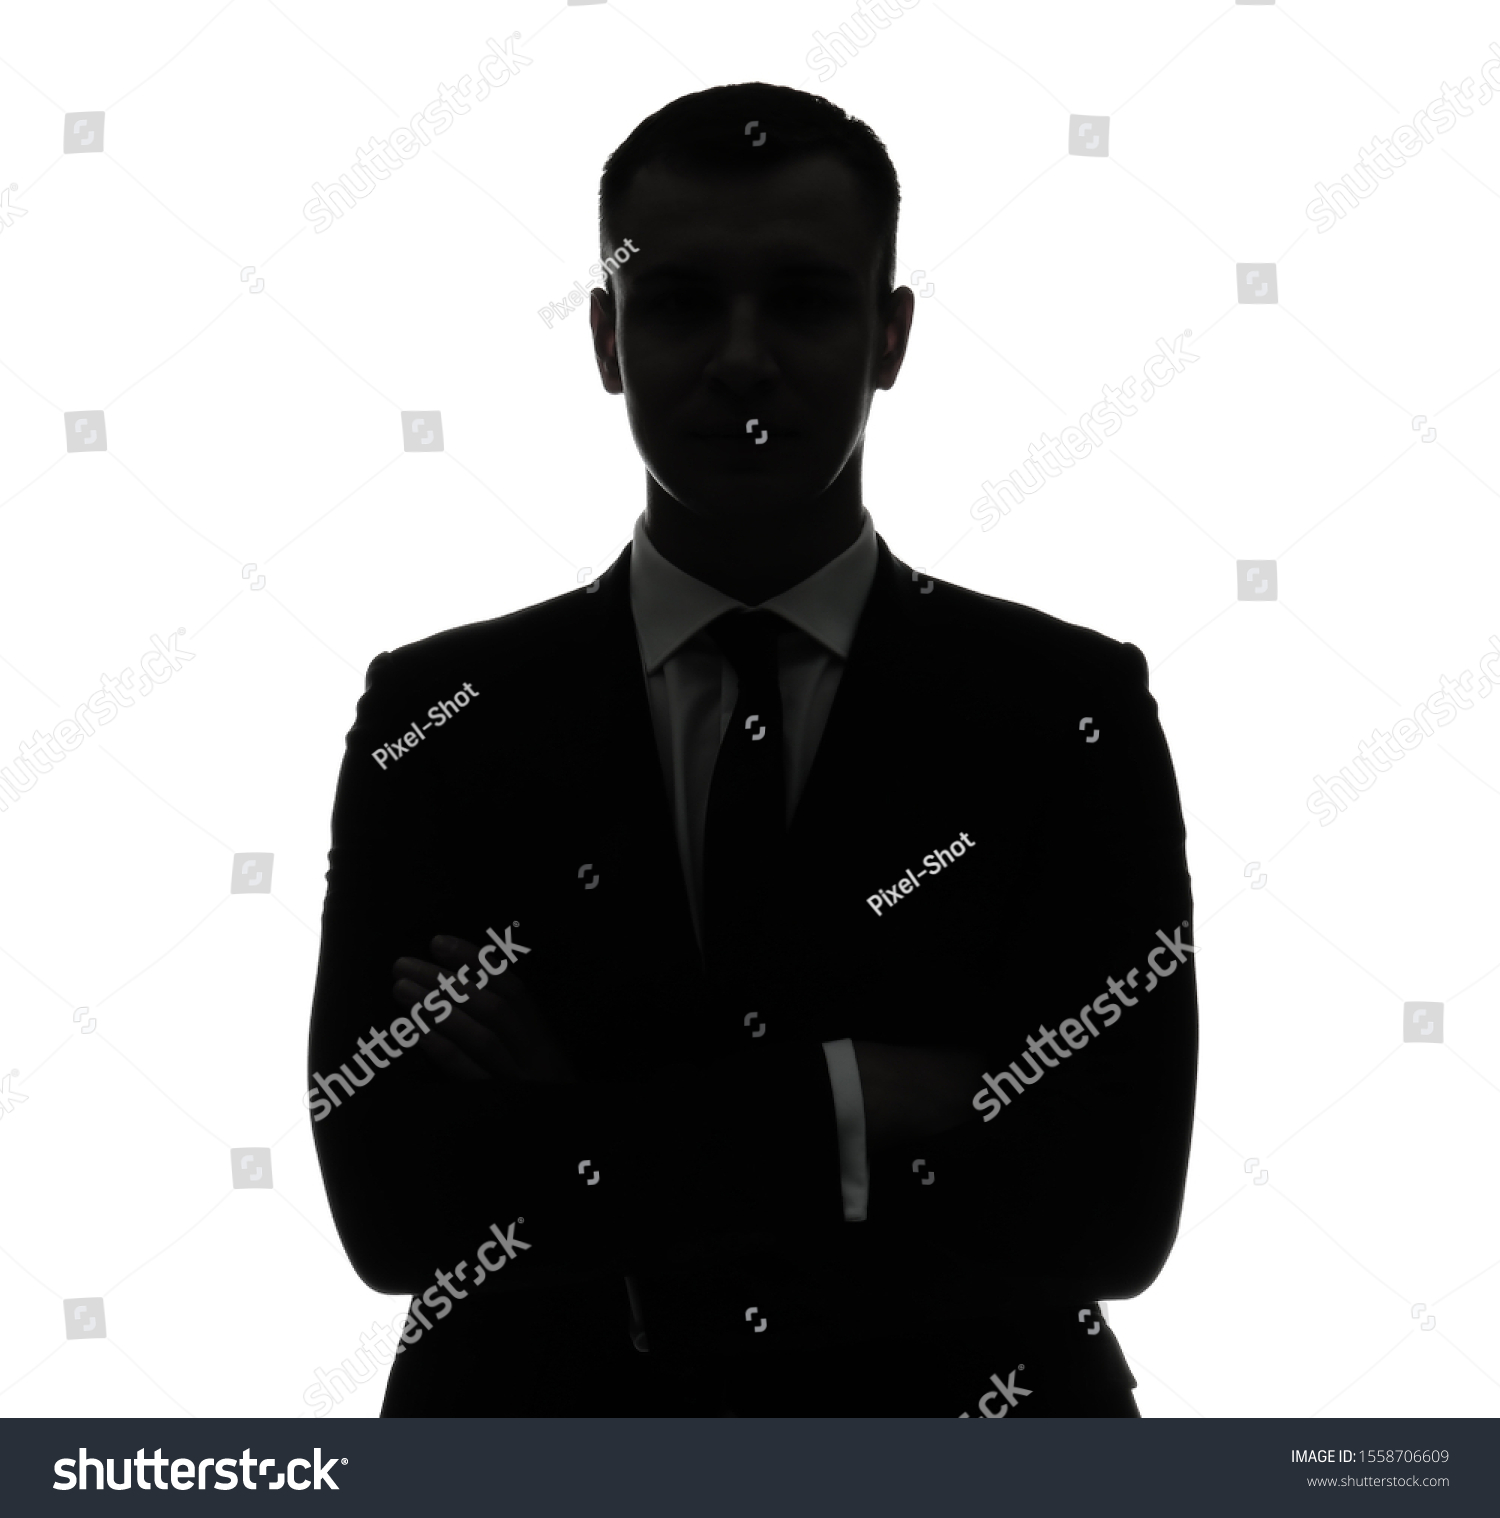 Silhouette of handsome businessman on white background #1558706609